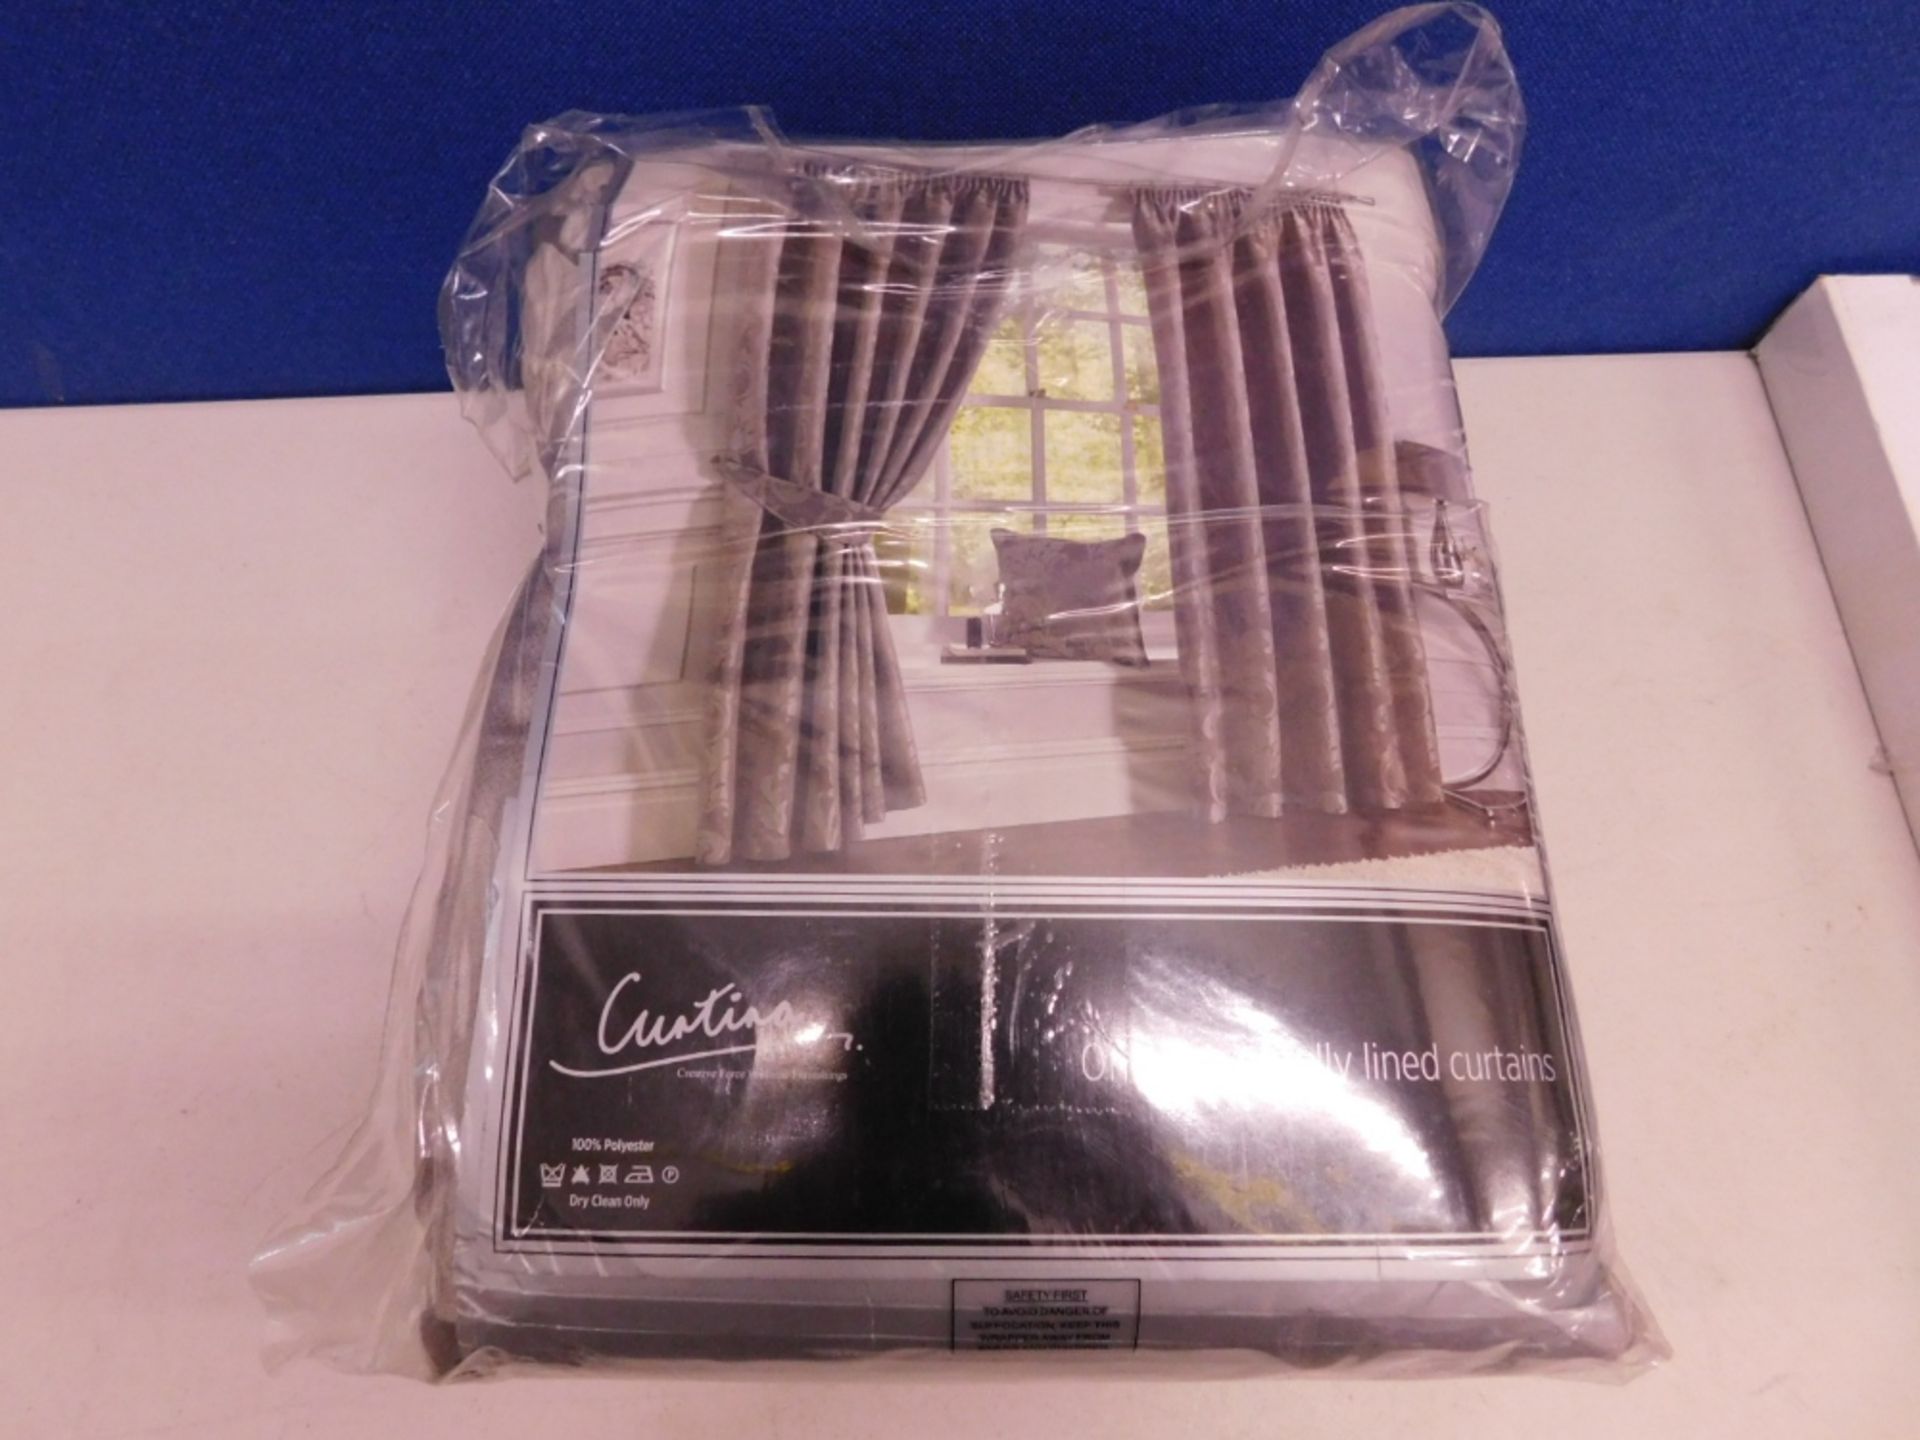 1 BAGGED CURTINA LUXURY CURTAINS 90"x 108" RRP £149.99